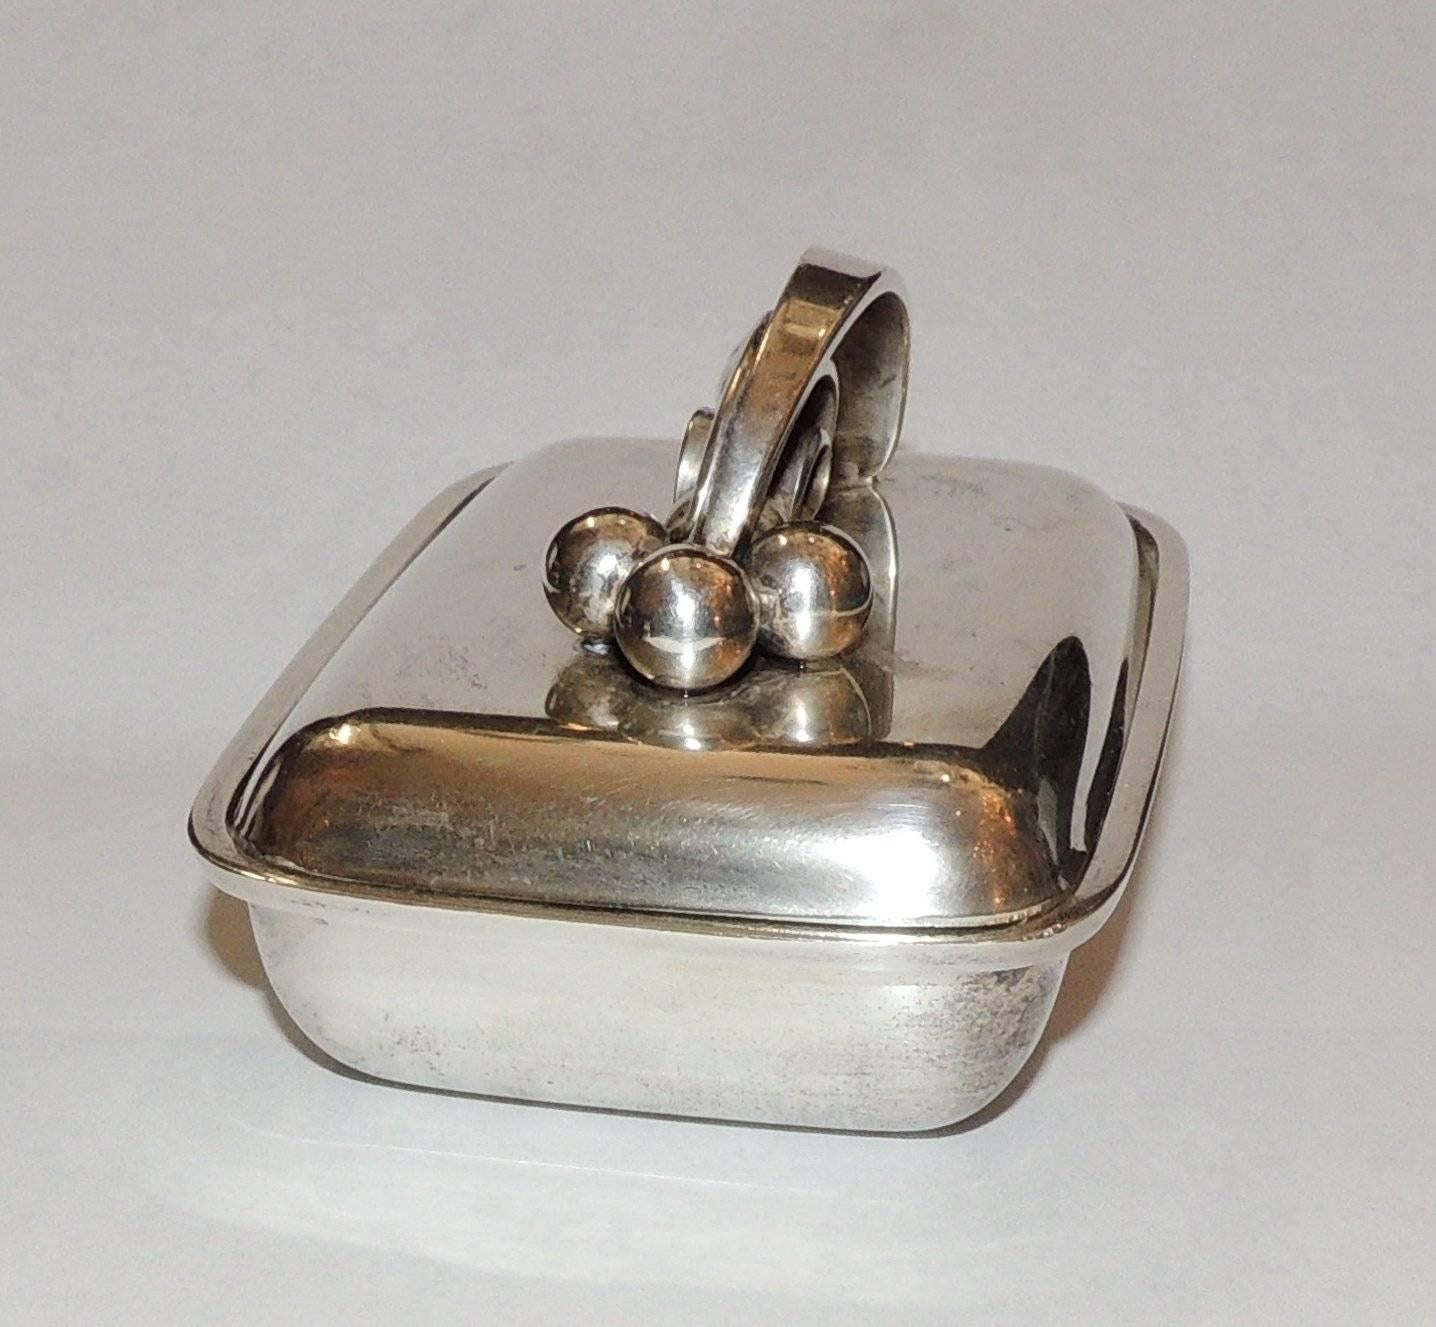 Alphonse La Paglia sterling silver modern covered box with unusual handle on the lid.
Lovely vintage condition.
Measures: 4" H x 3" W x 2.5" H
Approximate 193 g silver.
 